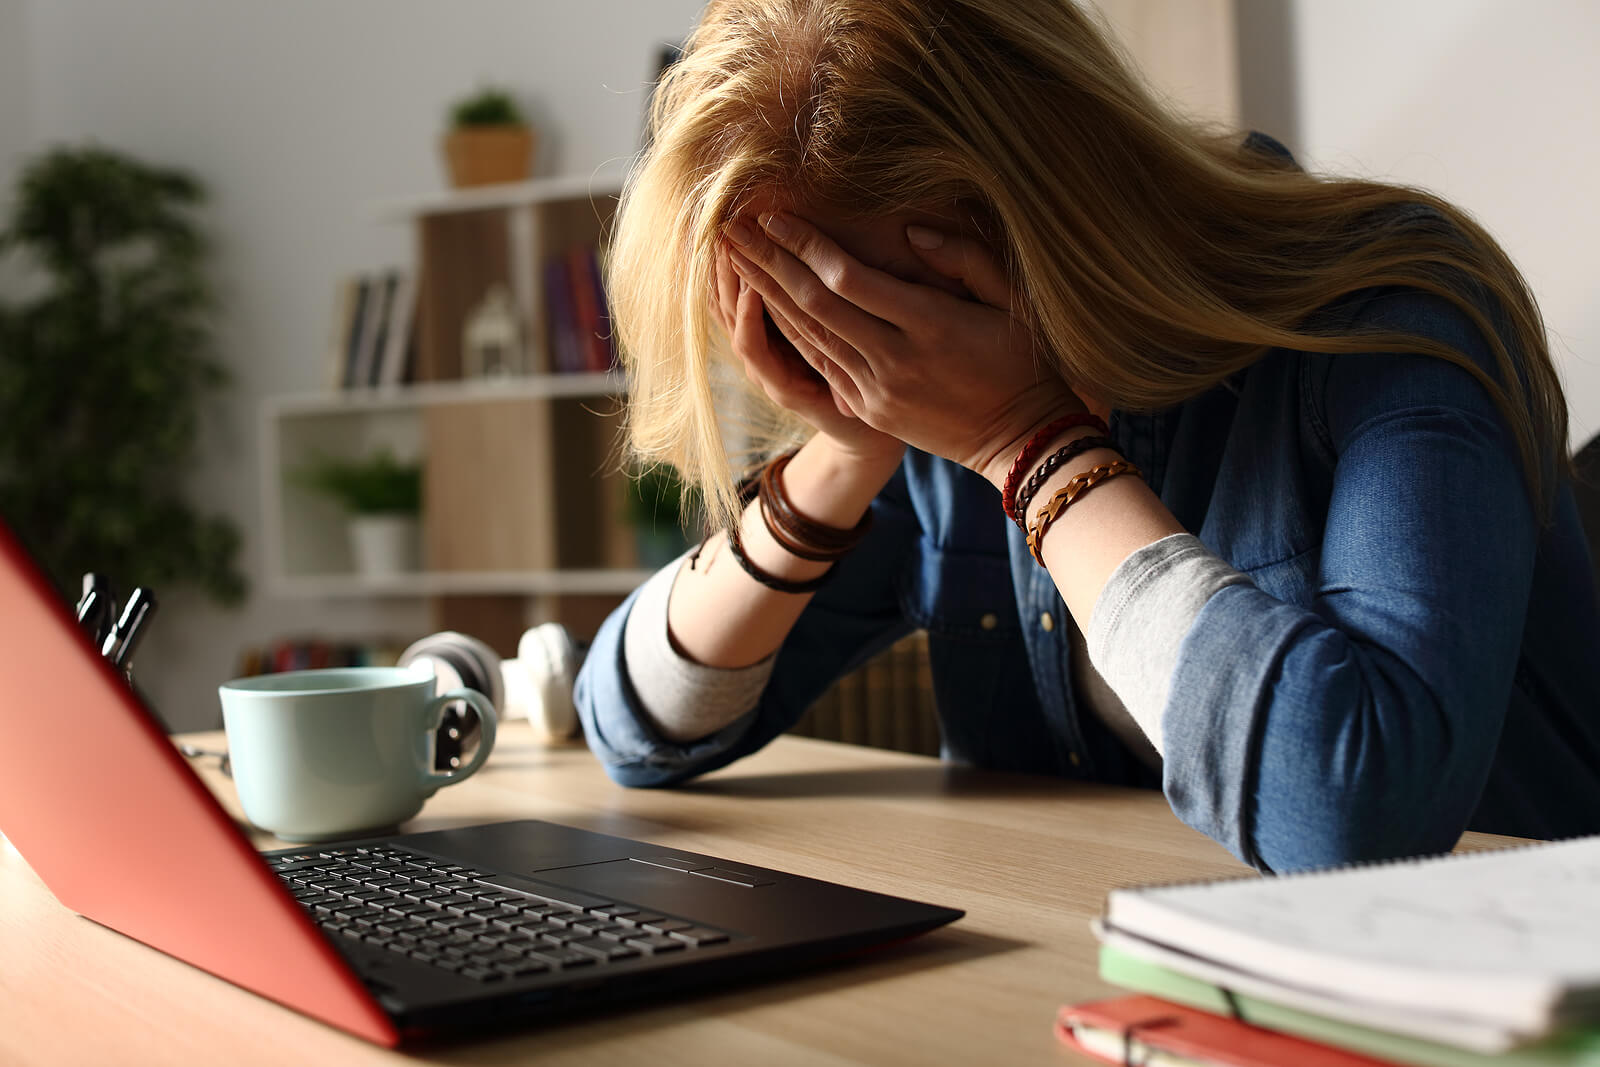 A woman cries into her hands in front of her laptop. Looking to move past your trust issues through online therapy in austin, tx? Speak with an online therapist in Texas to learn if it is right for you!